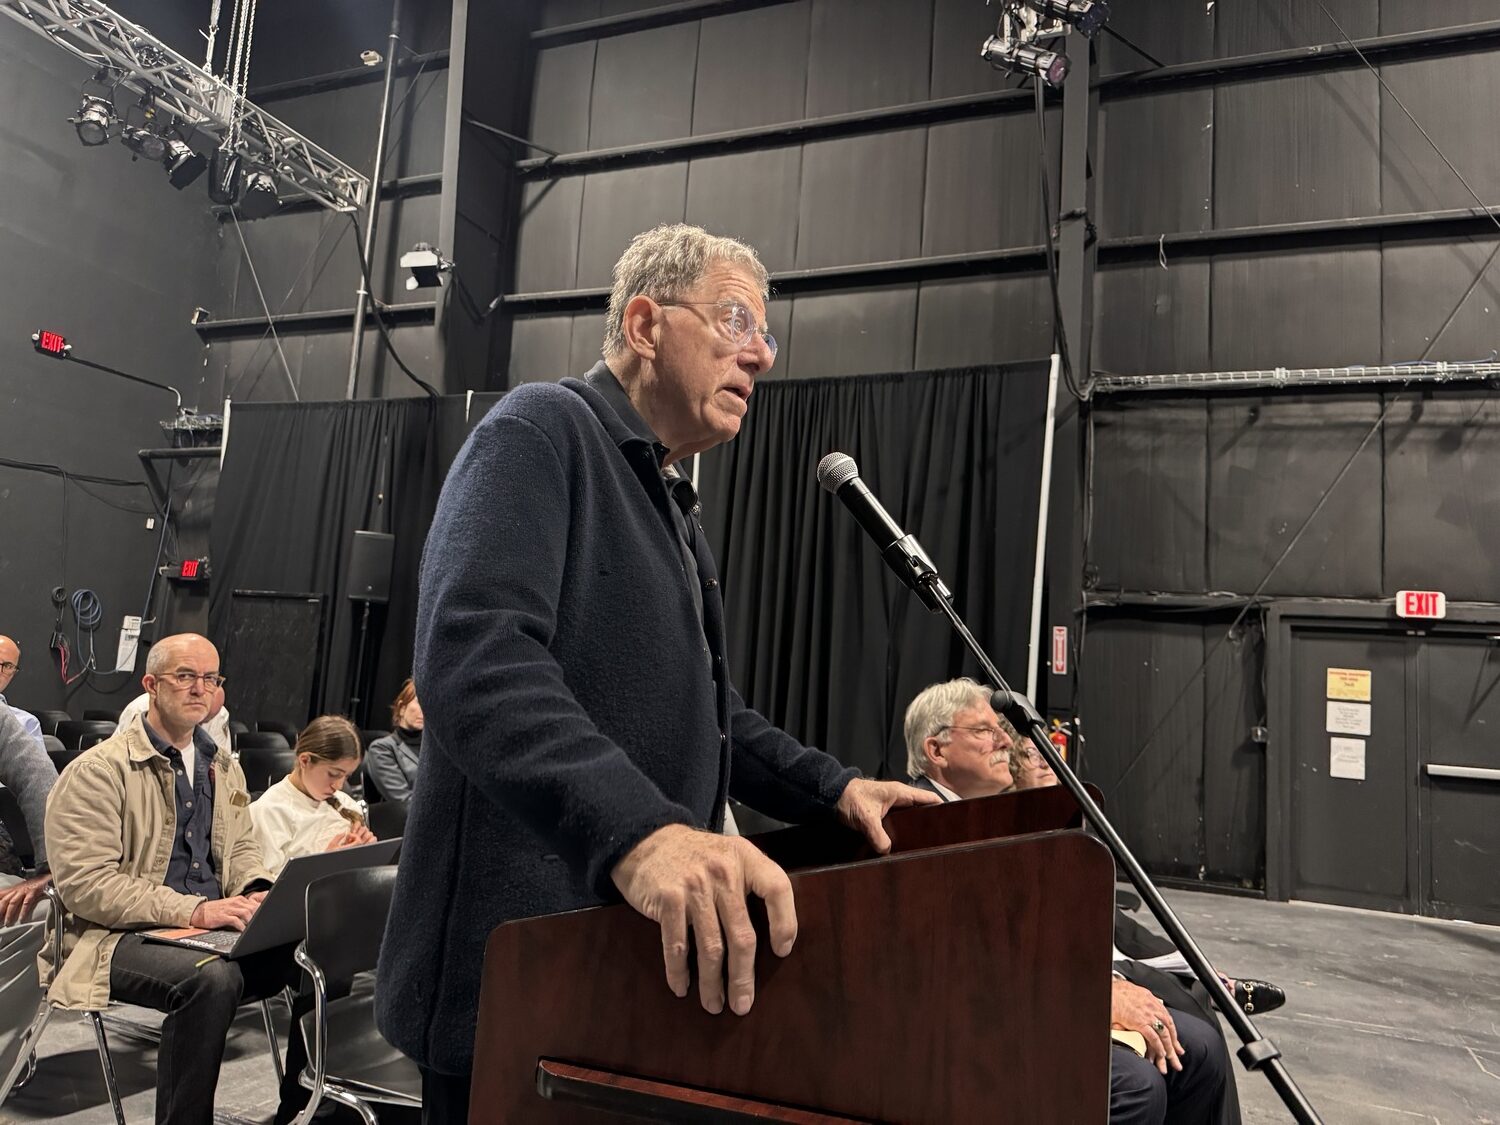 Martin Cohen, the chairman of the board of trustees for Guild Hall, asked that the village consider making the curfew on restaurants in the historic district after 11 p.m. instead of 10 p.m. to allow Guild Hall patrons to linger at post-show receptions or go out to dinner at nearby restaurants. MICHAEL WRIGHT